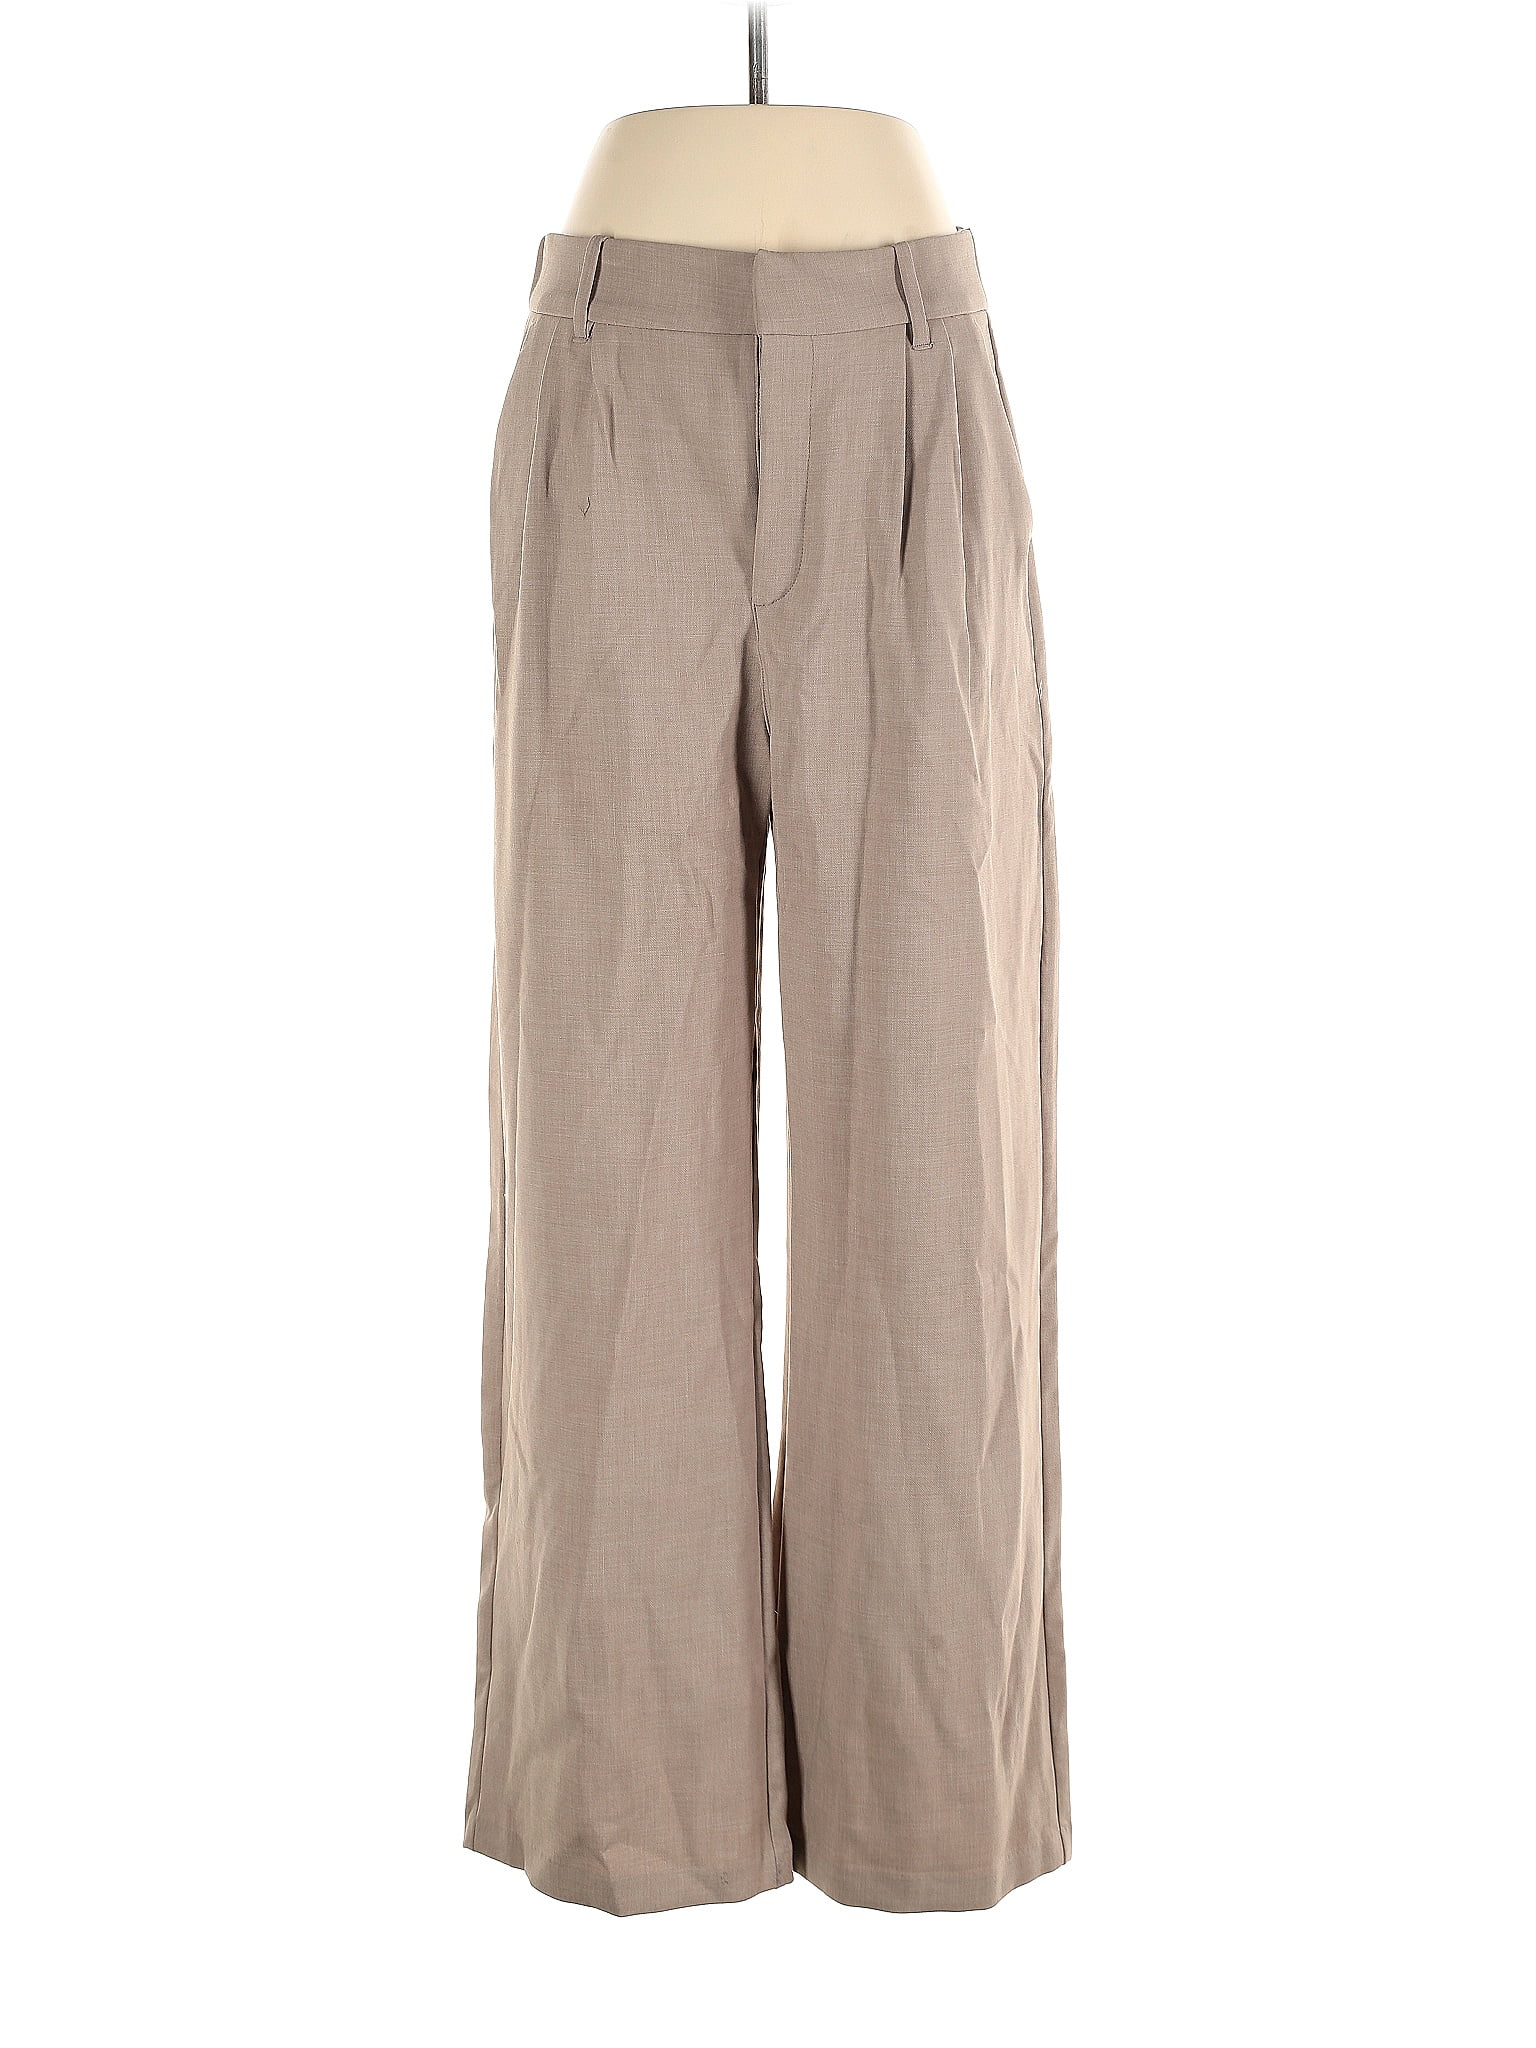 Abercrombie & Fitch Solid Brown Tan Dress Pants Size M - 62% off | ThredUp